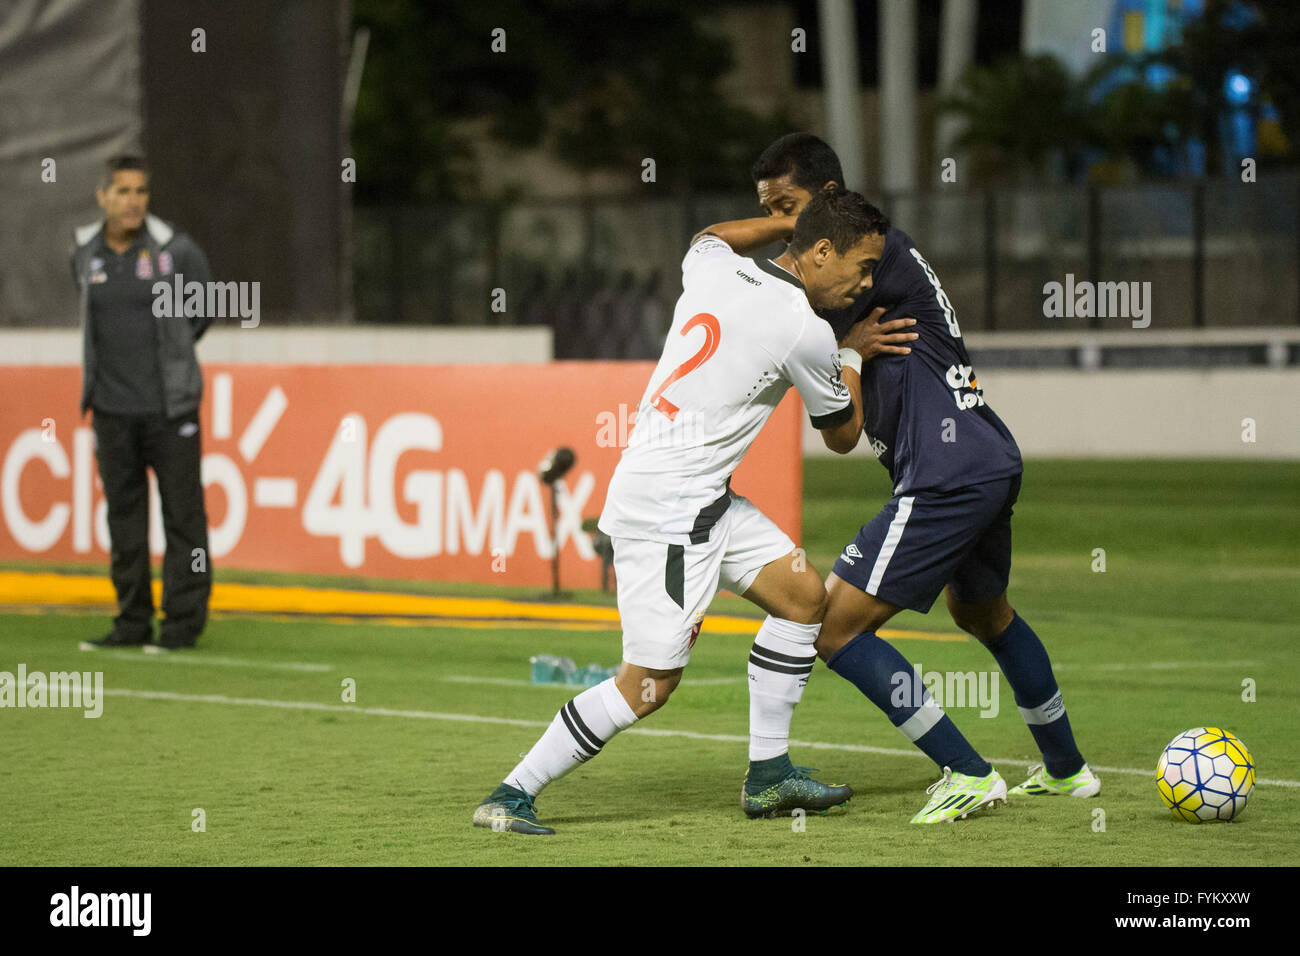 RIO DE JANEIRO, Brazil - 04/27/2016: VASCO X REMO - Pikachu Yago and Chico for Vasco da Gama-RJ X Remo-PA for the second game of the group phase in the Brazil Cup in S?o Janu?rio. (Photo: Celso Pupo / FotoArena) Stock Photo